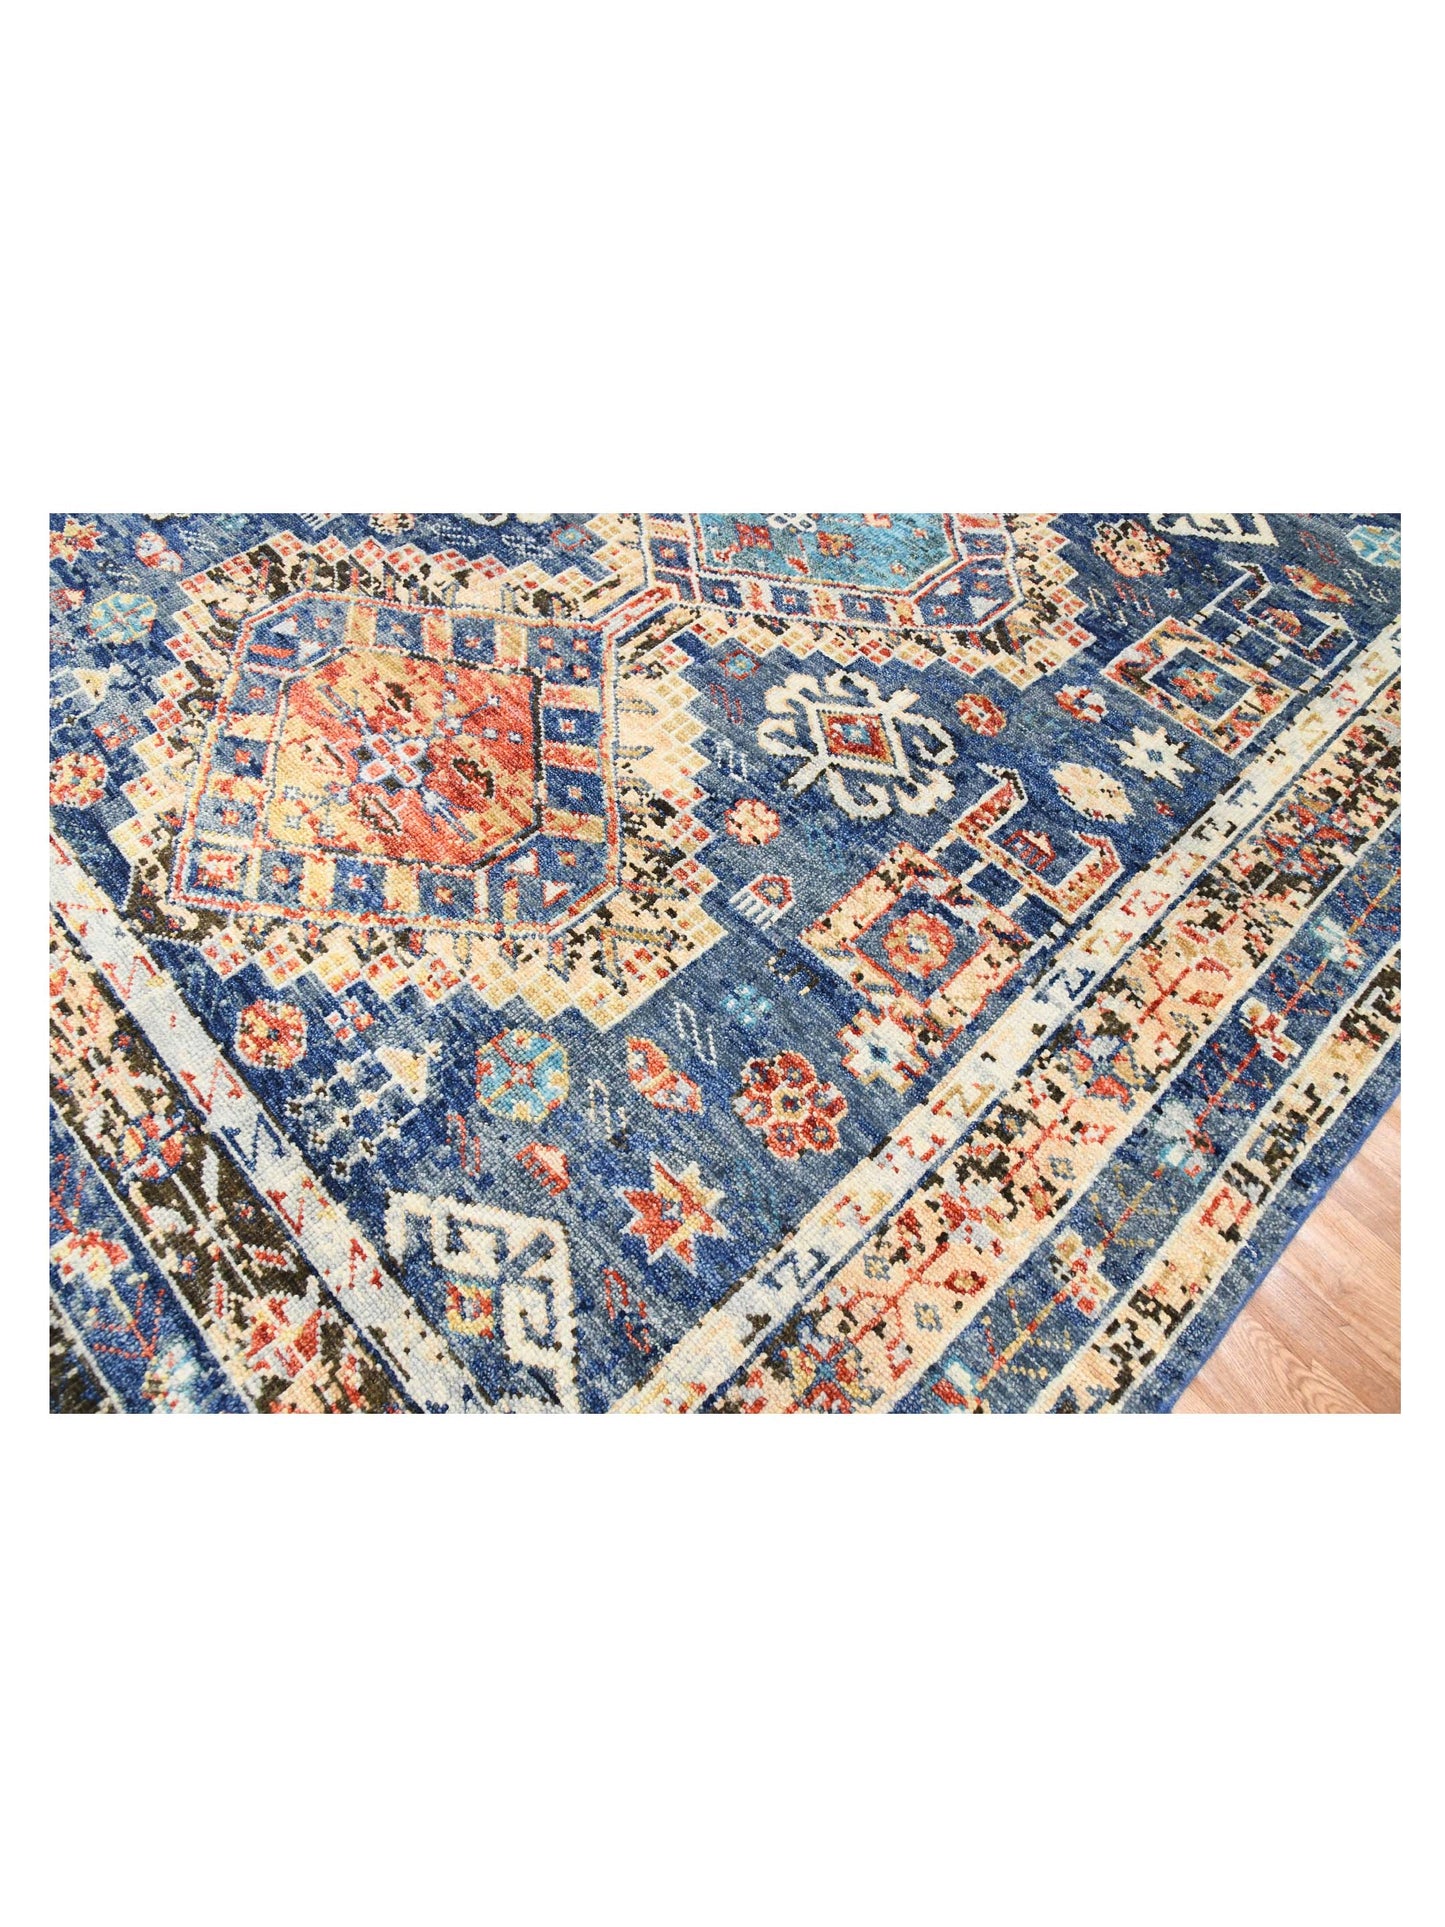 Limited Woodburn WOD-551 NAVY  Traditional Knotted Rug